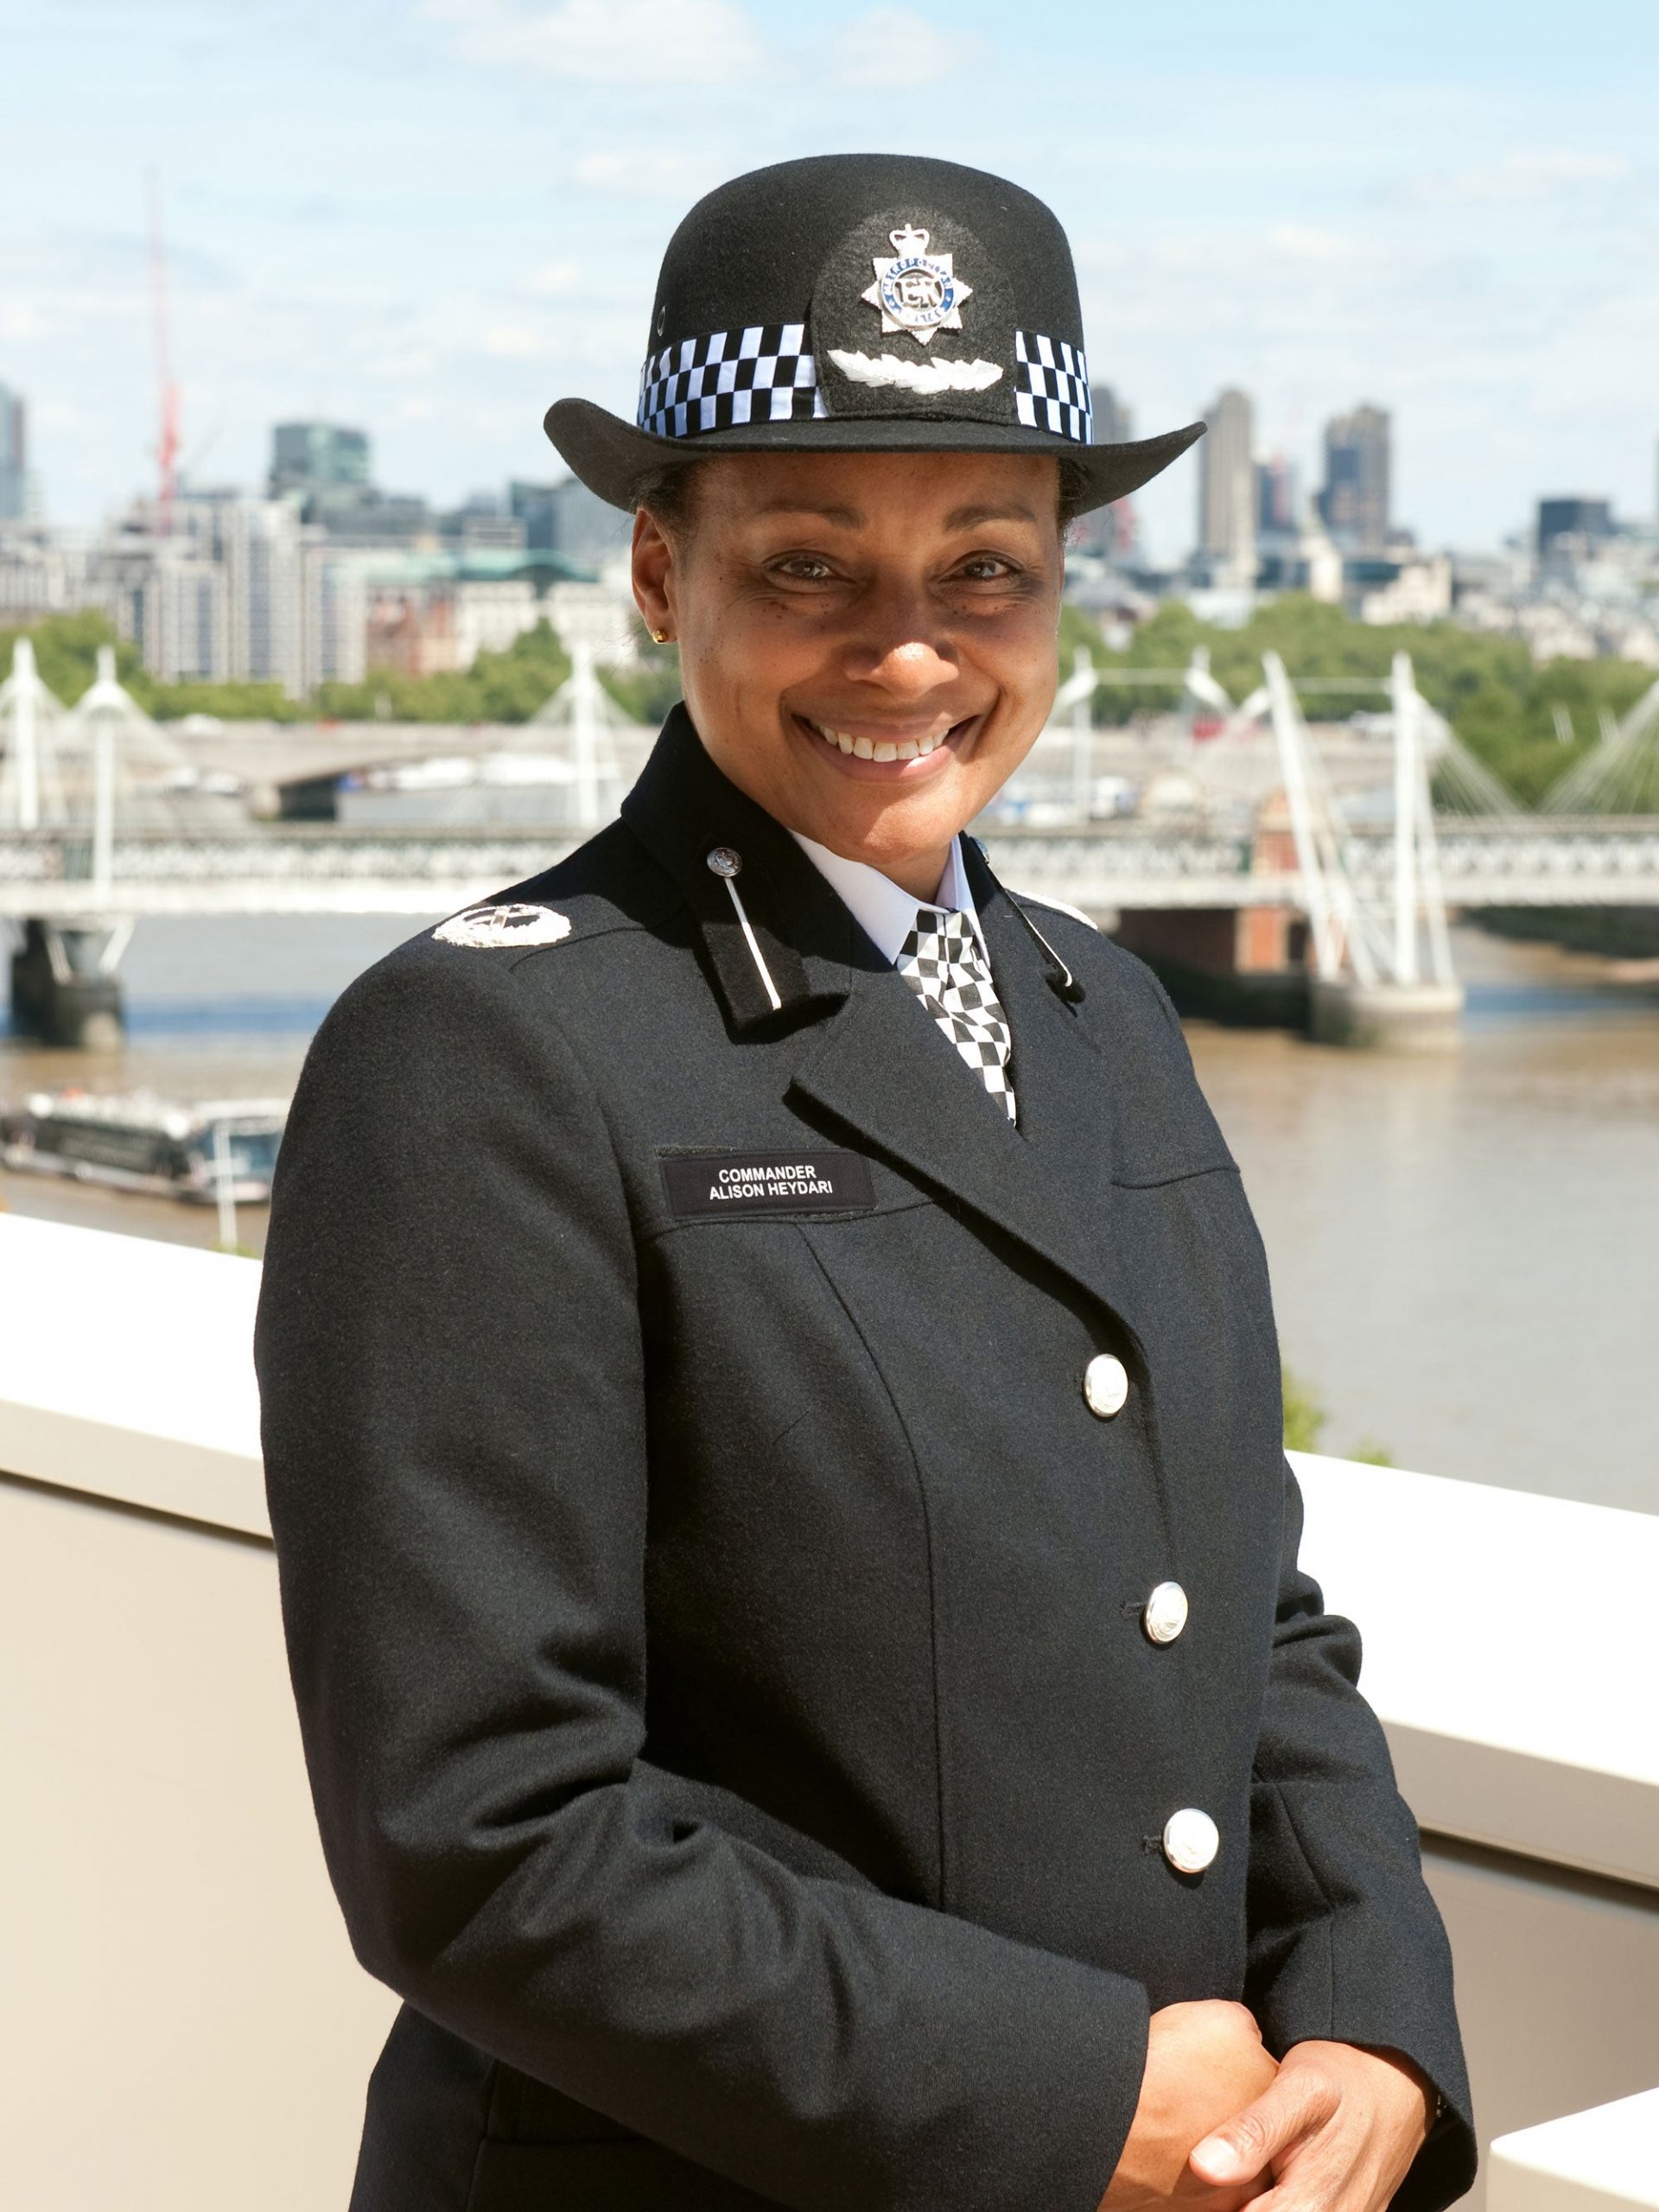 Diversity and Inclusion in UK Policing